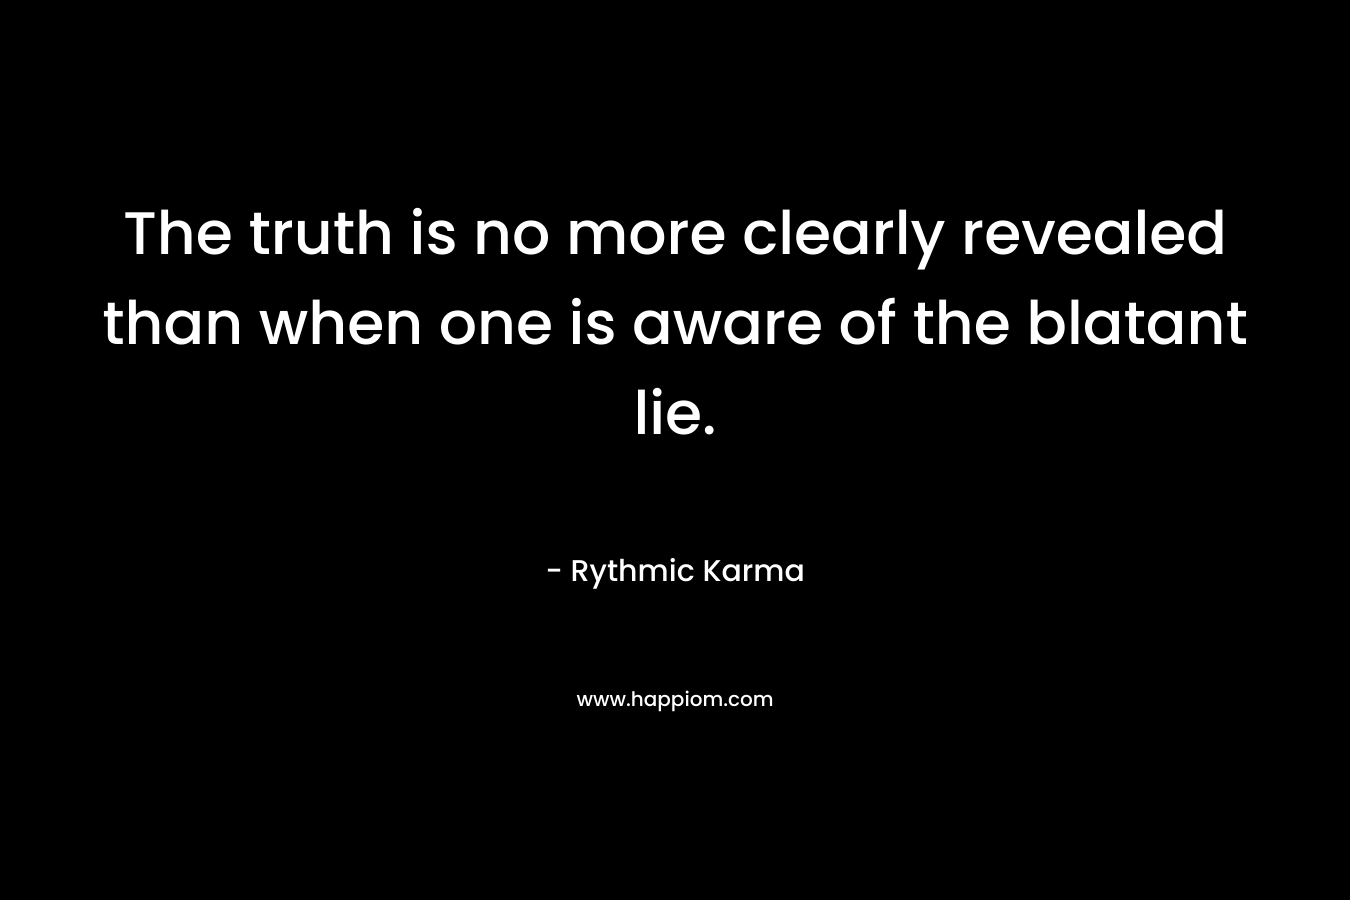 The truth is no more clearly revealed than when one is aware of the blatant lie. – Rythmic Karma